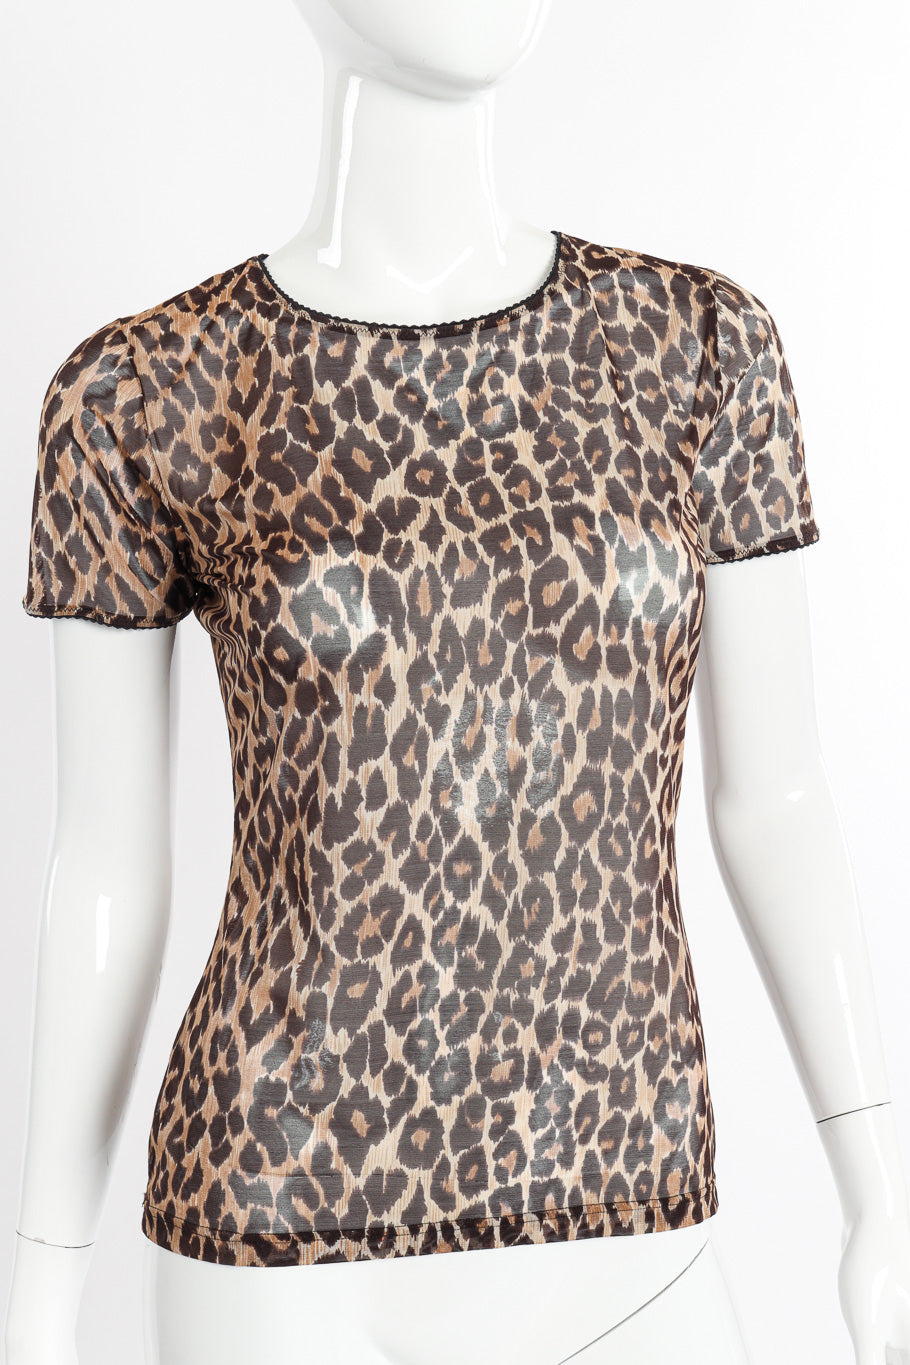 Leopard Mesh Top by Dolce & Gabbana on mannequin front close @recessla